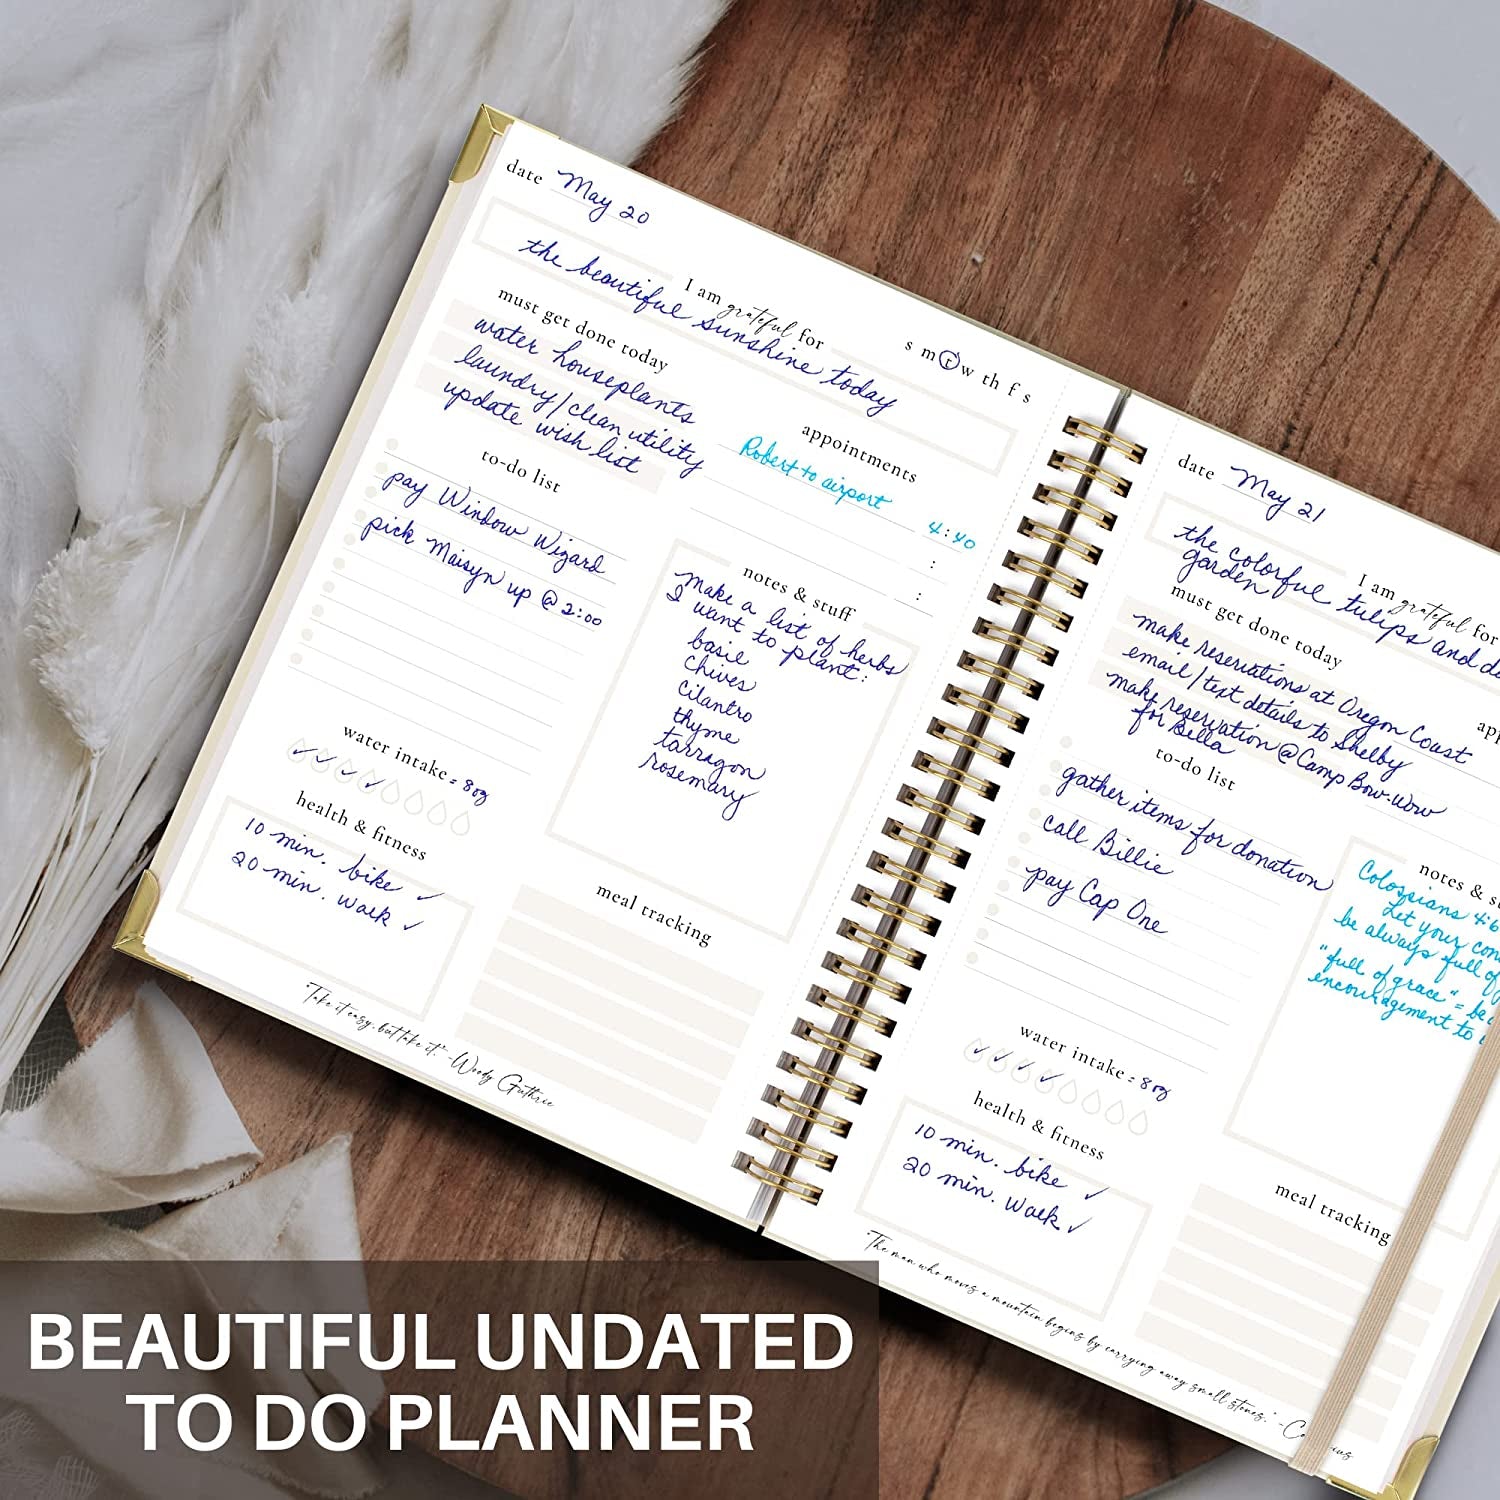 Simplified to Do List Notebook - Aesthetic Daily Planner to Easily Organize Your Tasks and Boost Productivity - Stylish Undated Planner and School or Office Supplies for Women